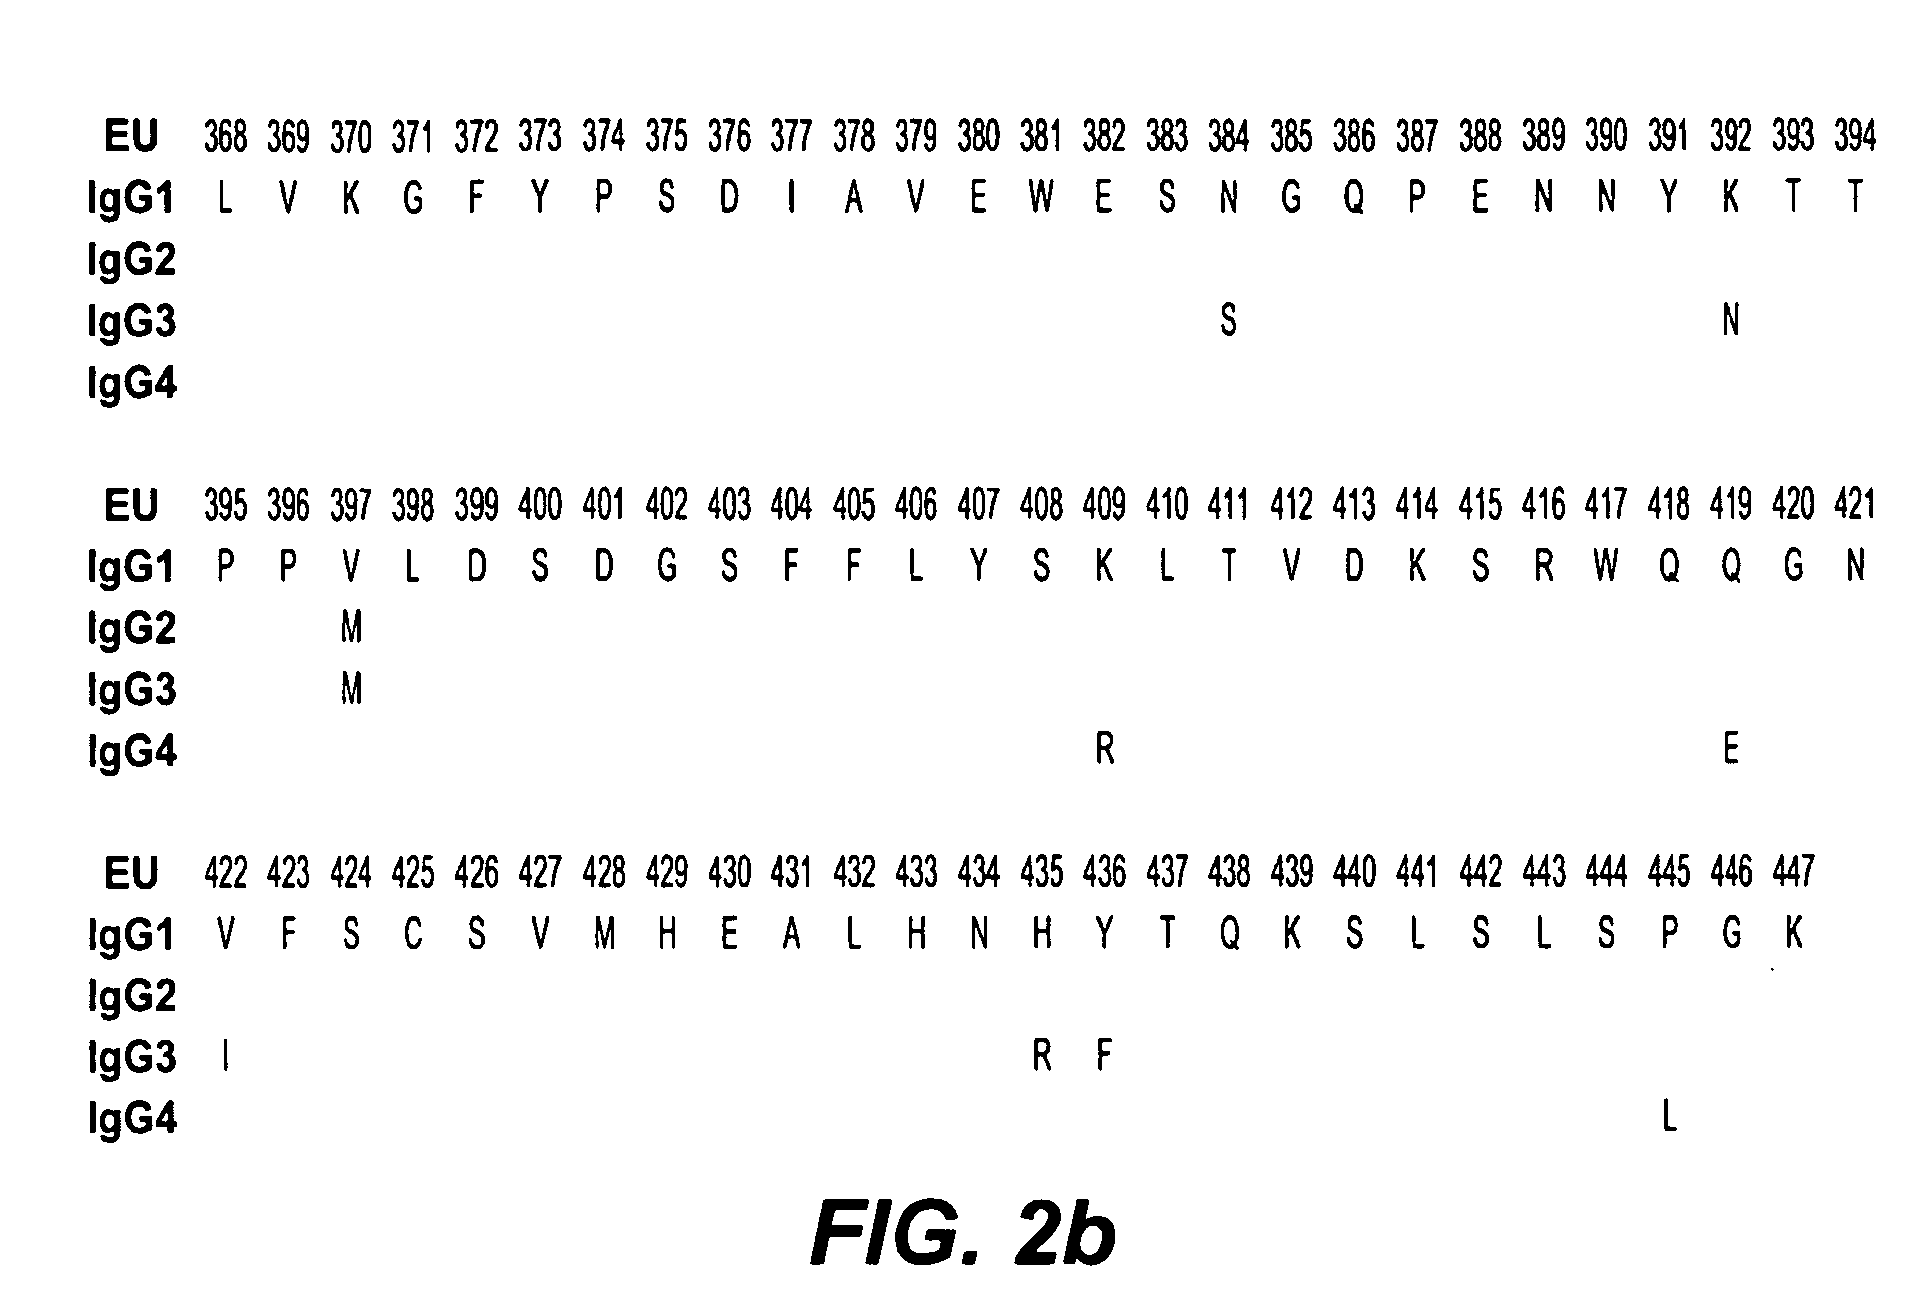 Fc variants with altered binding to FcRn